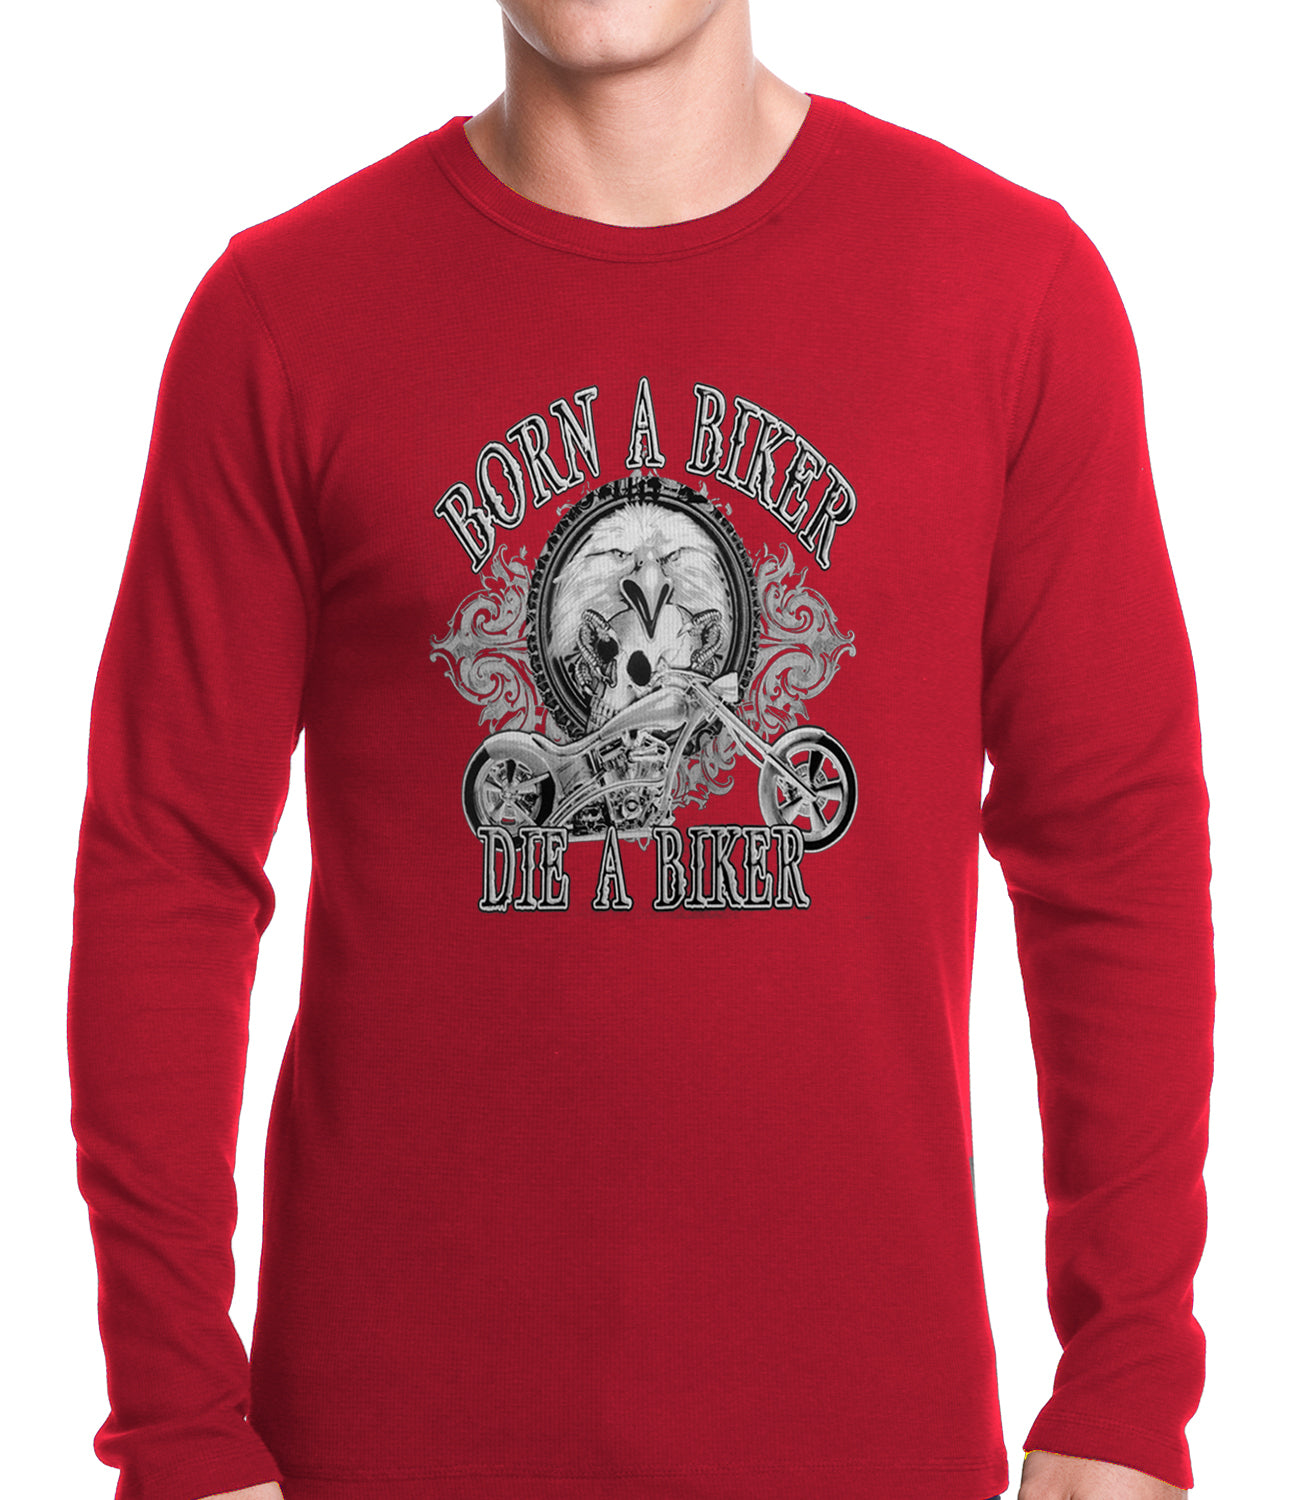 Born to be a Biker Thermal Shirt